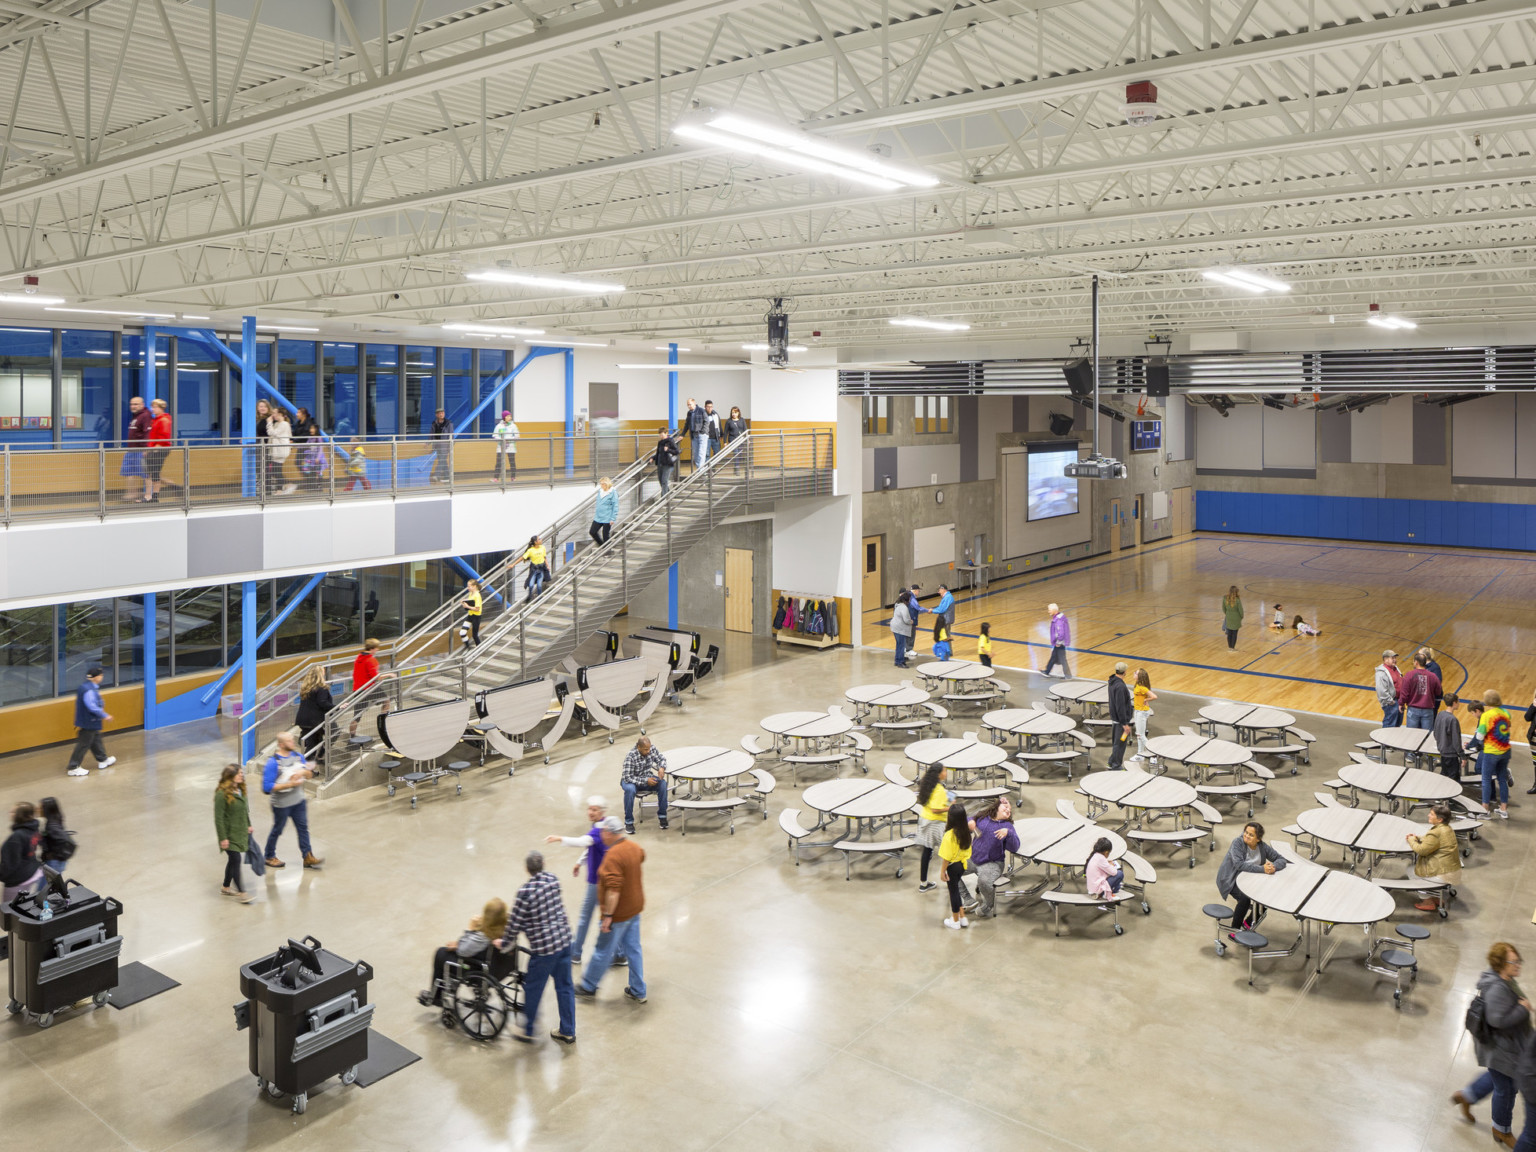 Cafeteria viewed from 2nd floor walkway facing gym. Rows of round folding tables with attached seating. Stairs on left wall